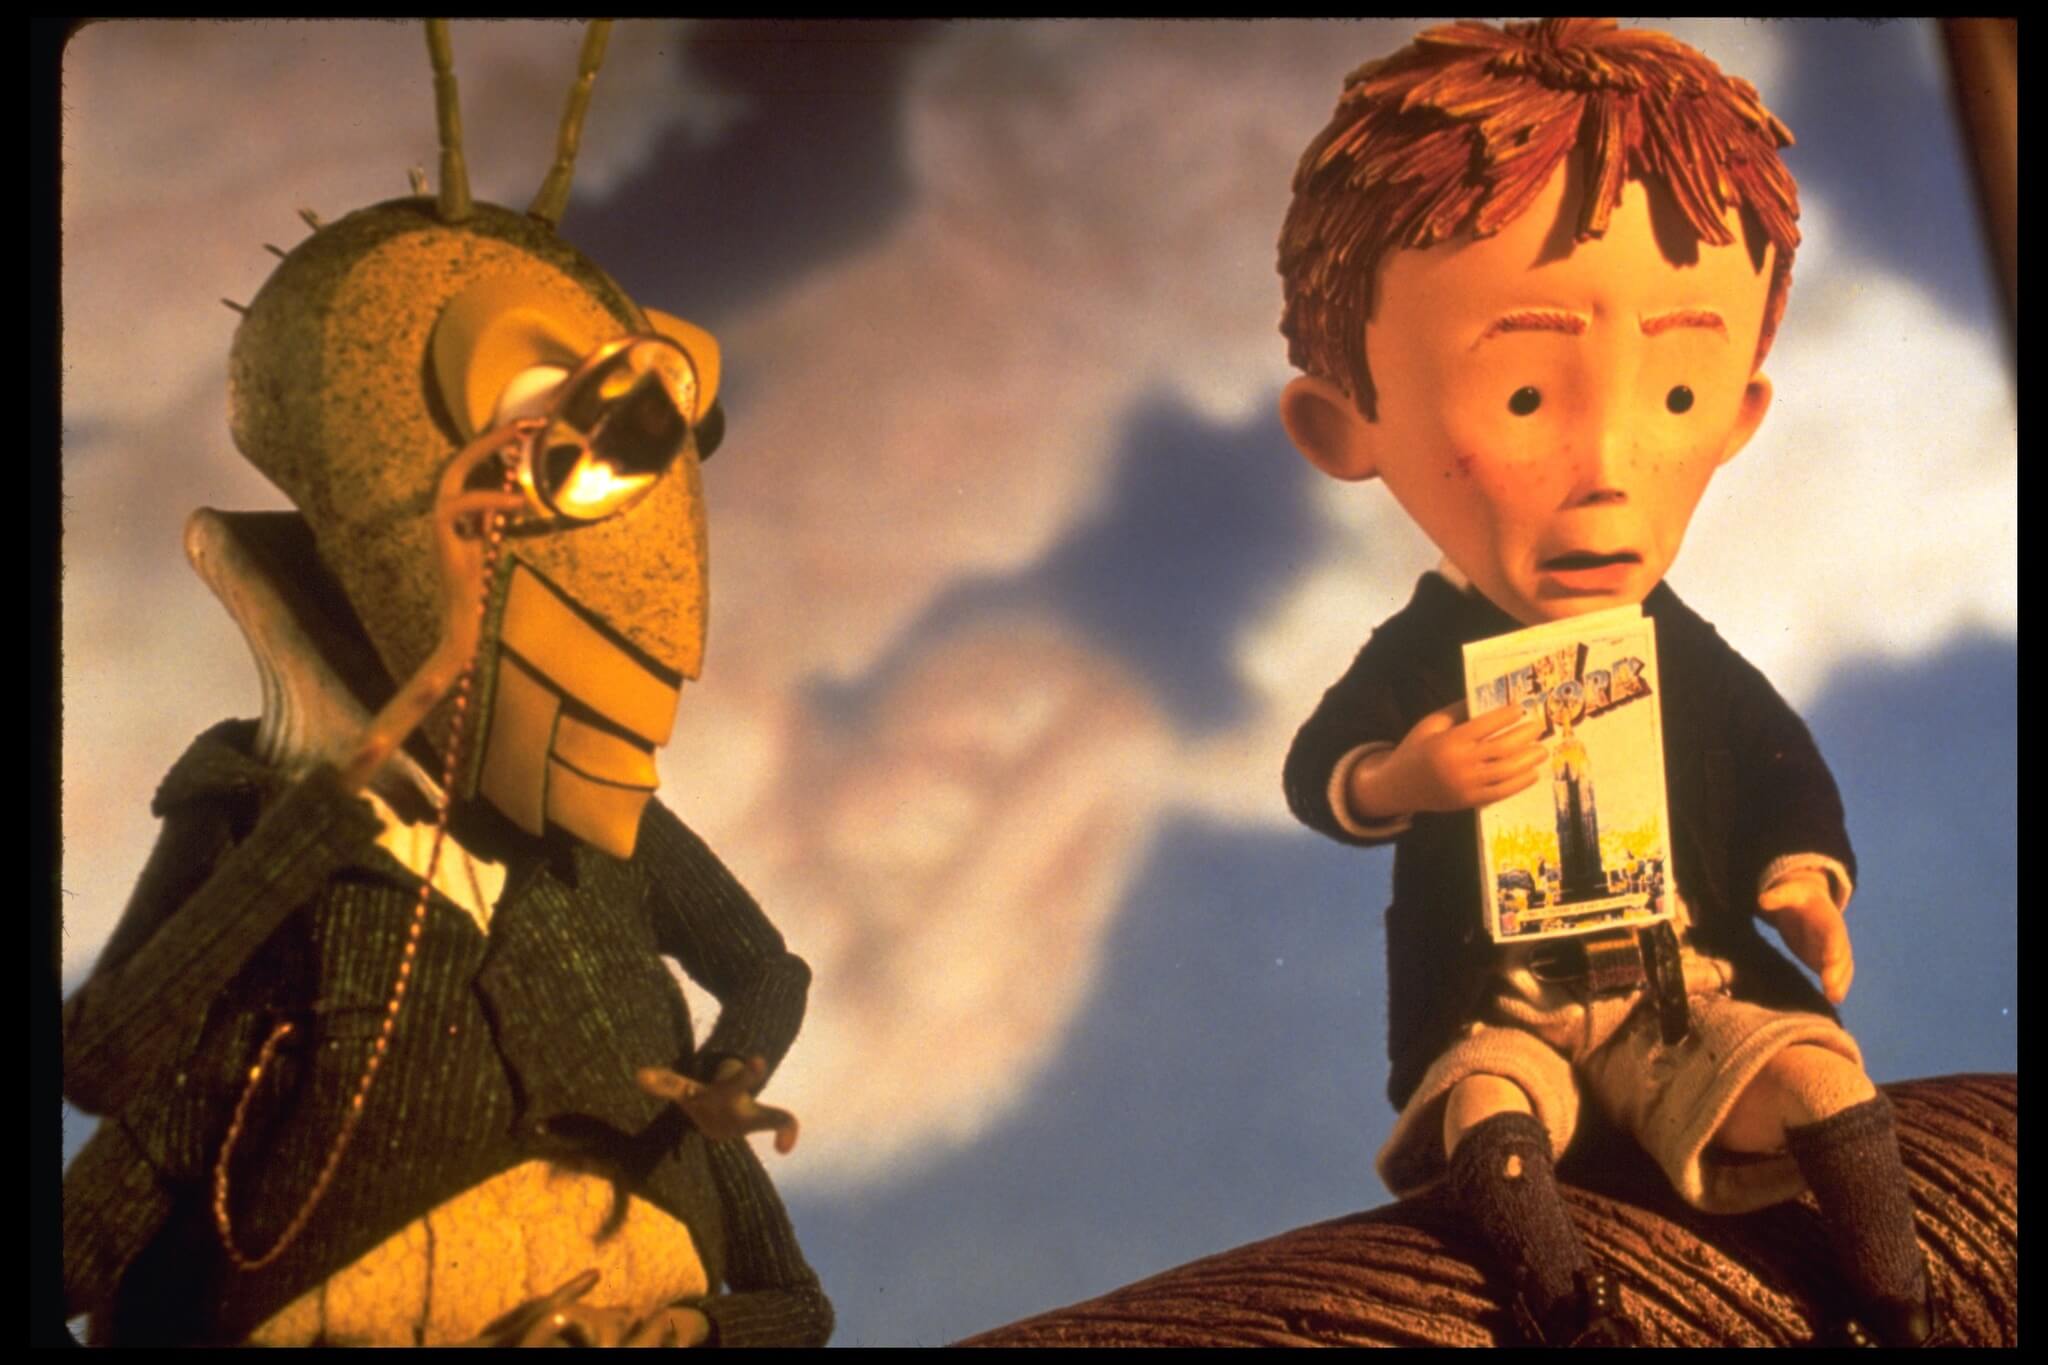 James-and-the-Giant-Peach-(1996)